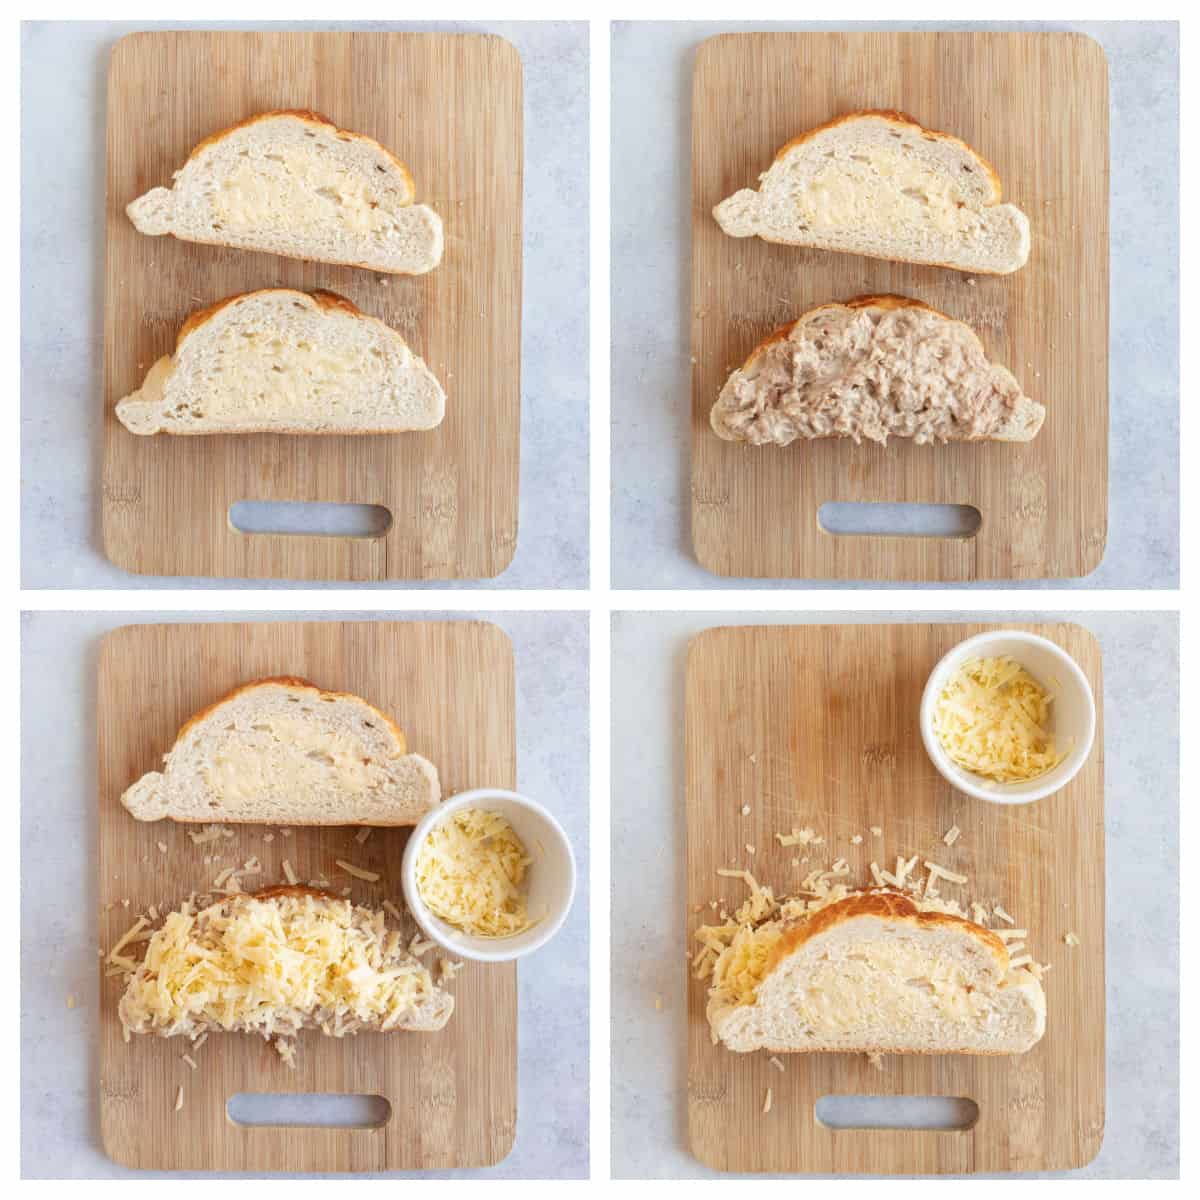 Step by step photo instructions for assembling the tuna melt.